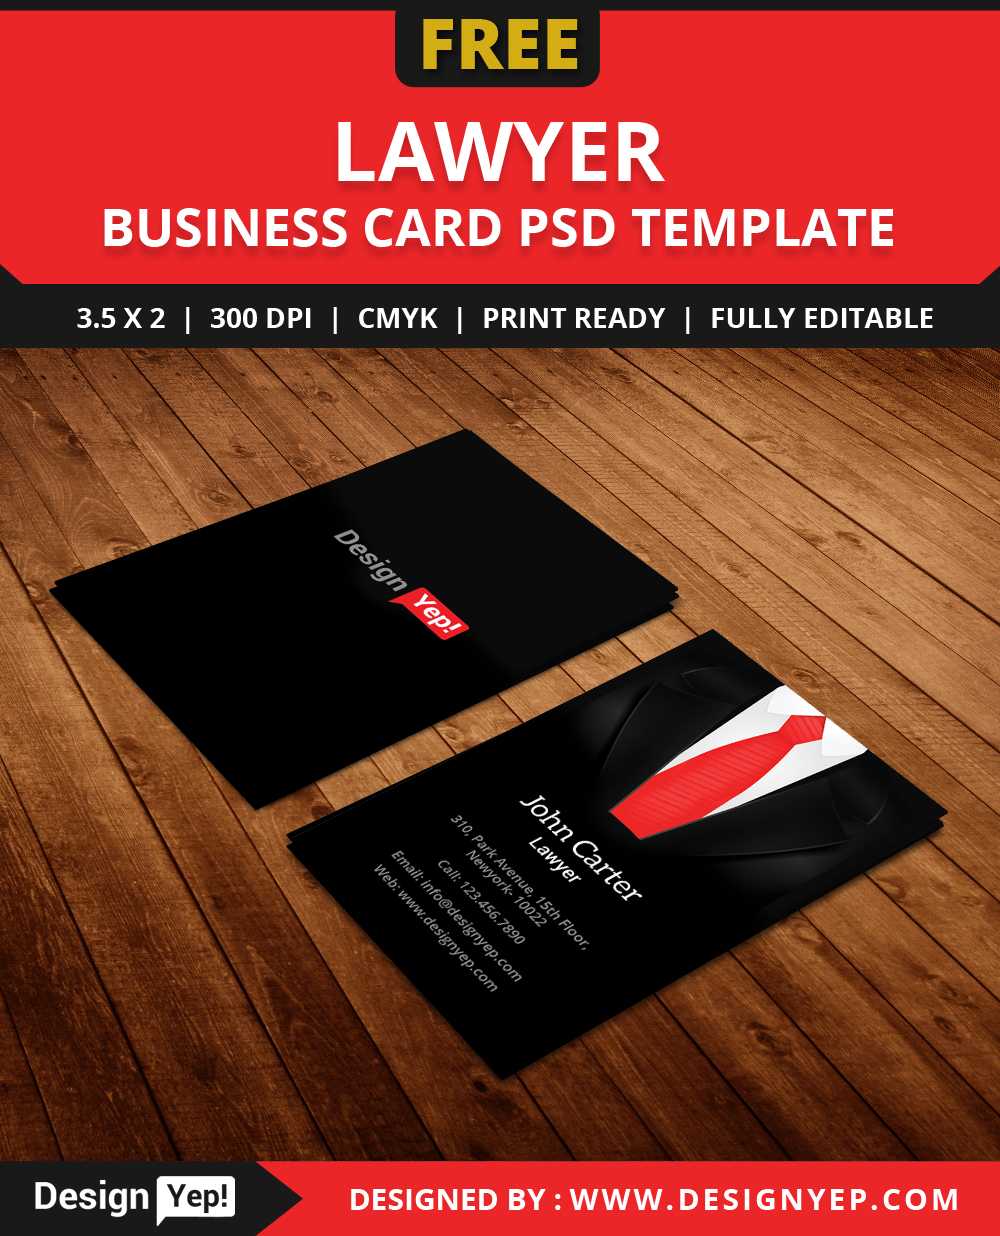 Free Lawyer Business Card Template Psd – Designyep Inside Legal Business Cards Templates Free